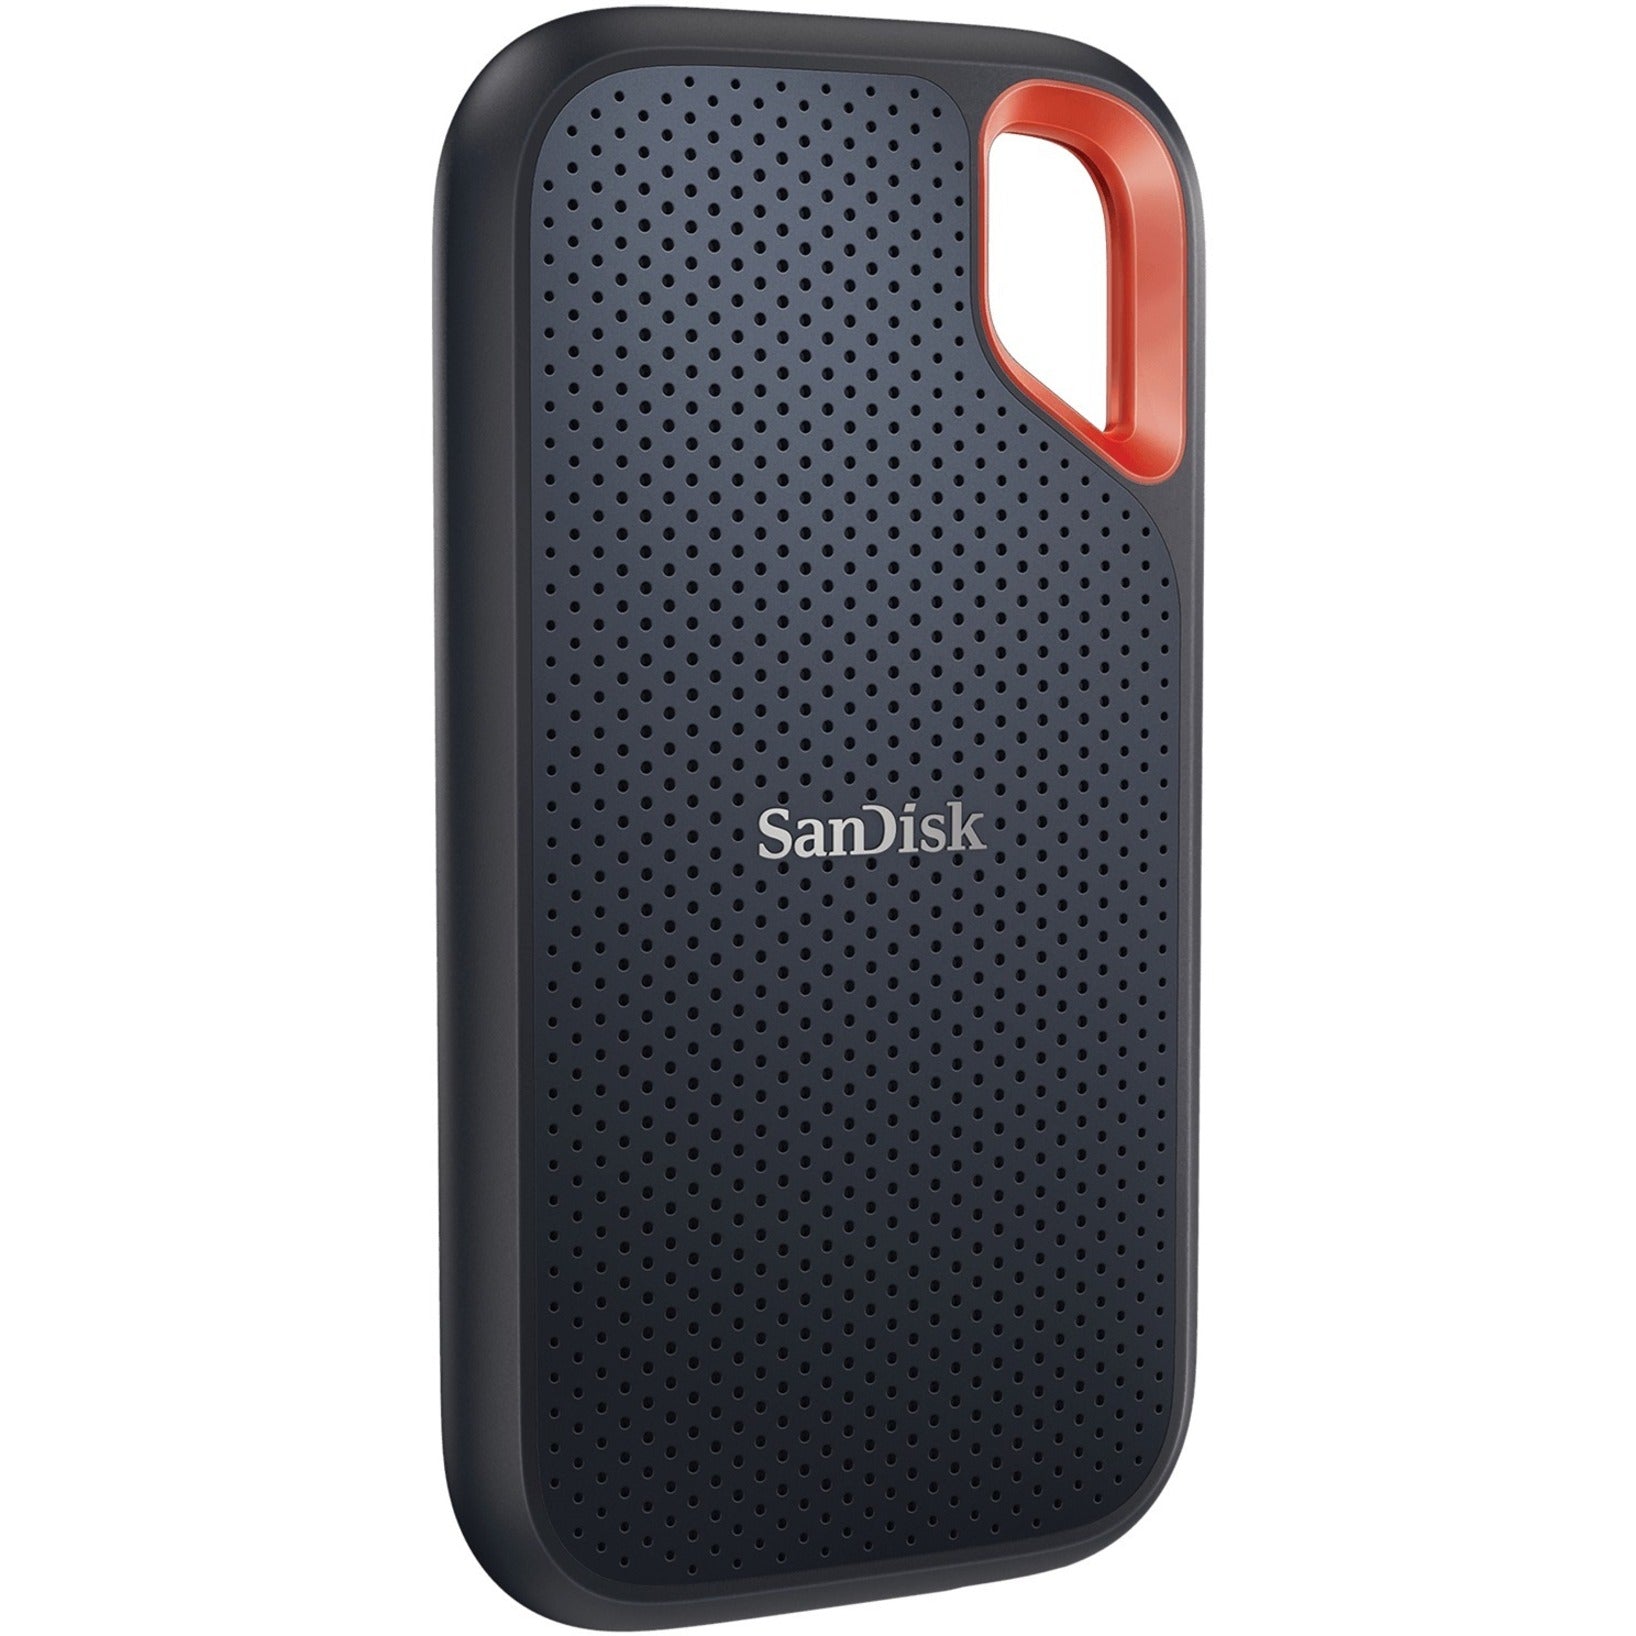 SanDisk SDSSDE61-2T00-G25 Extreme Portable SSD 2TB, Fast and Reliable Solid State Drive